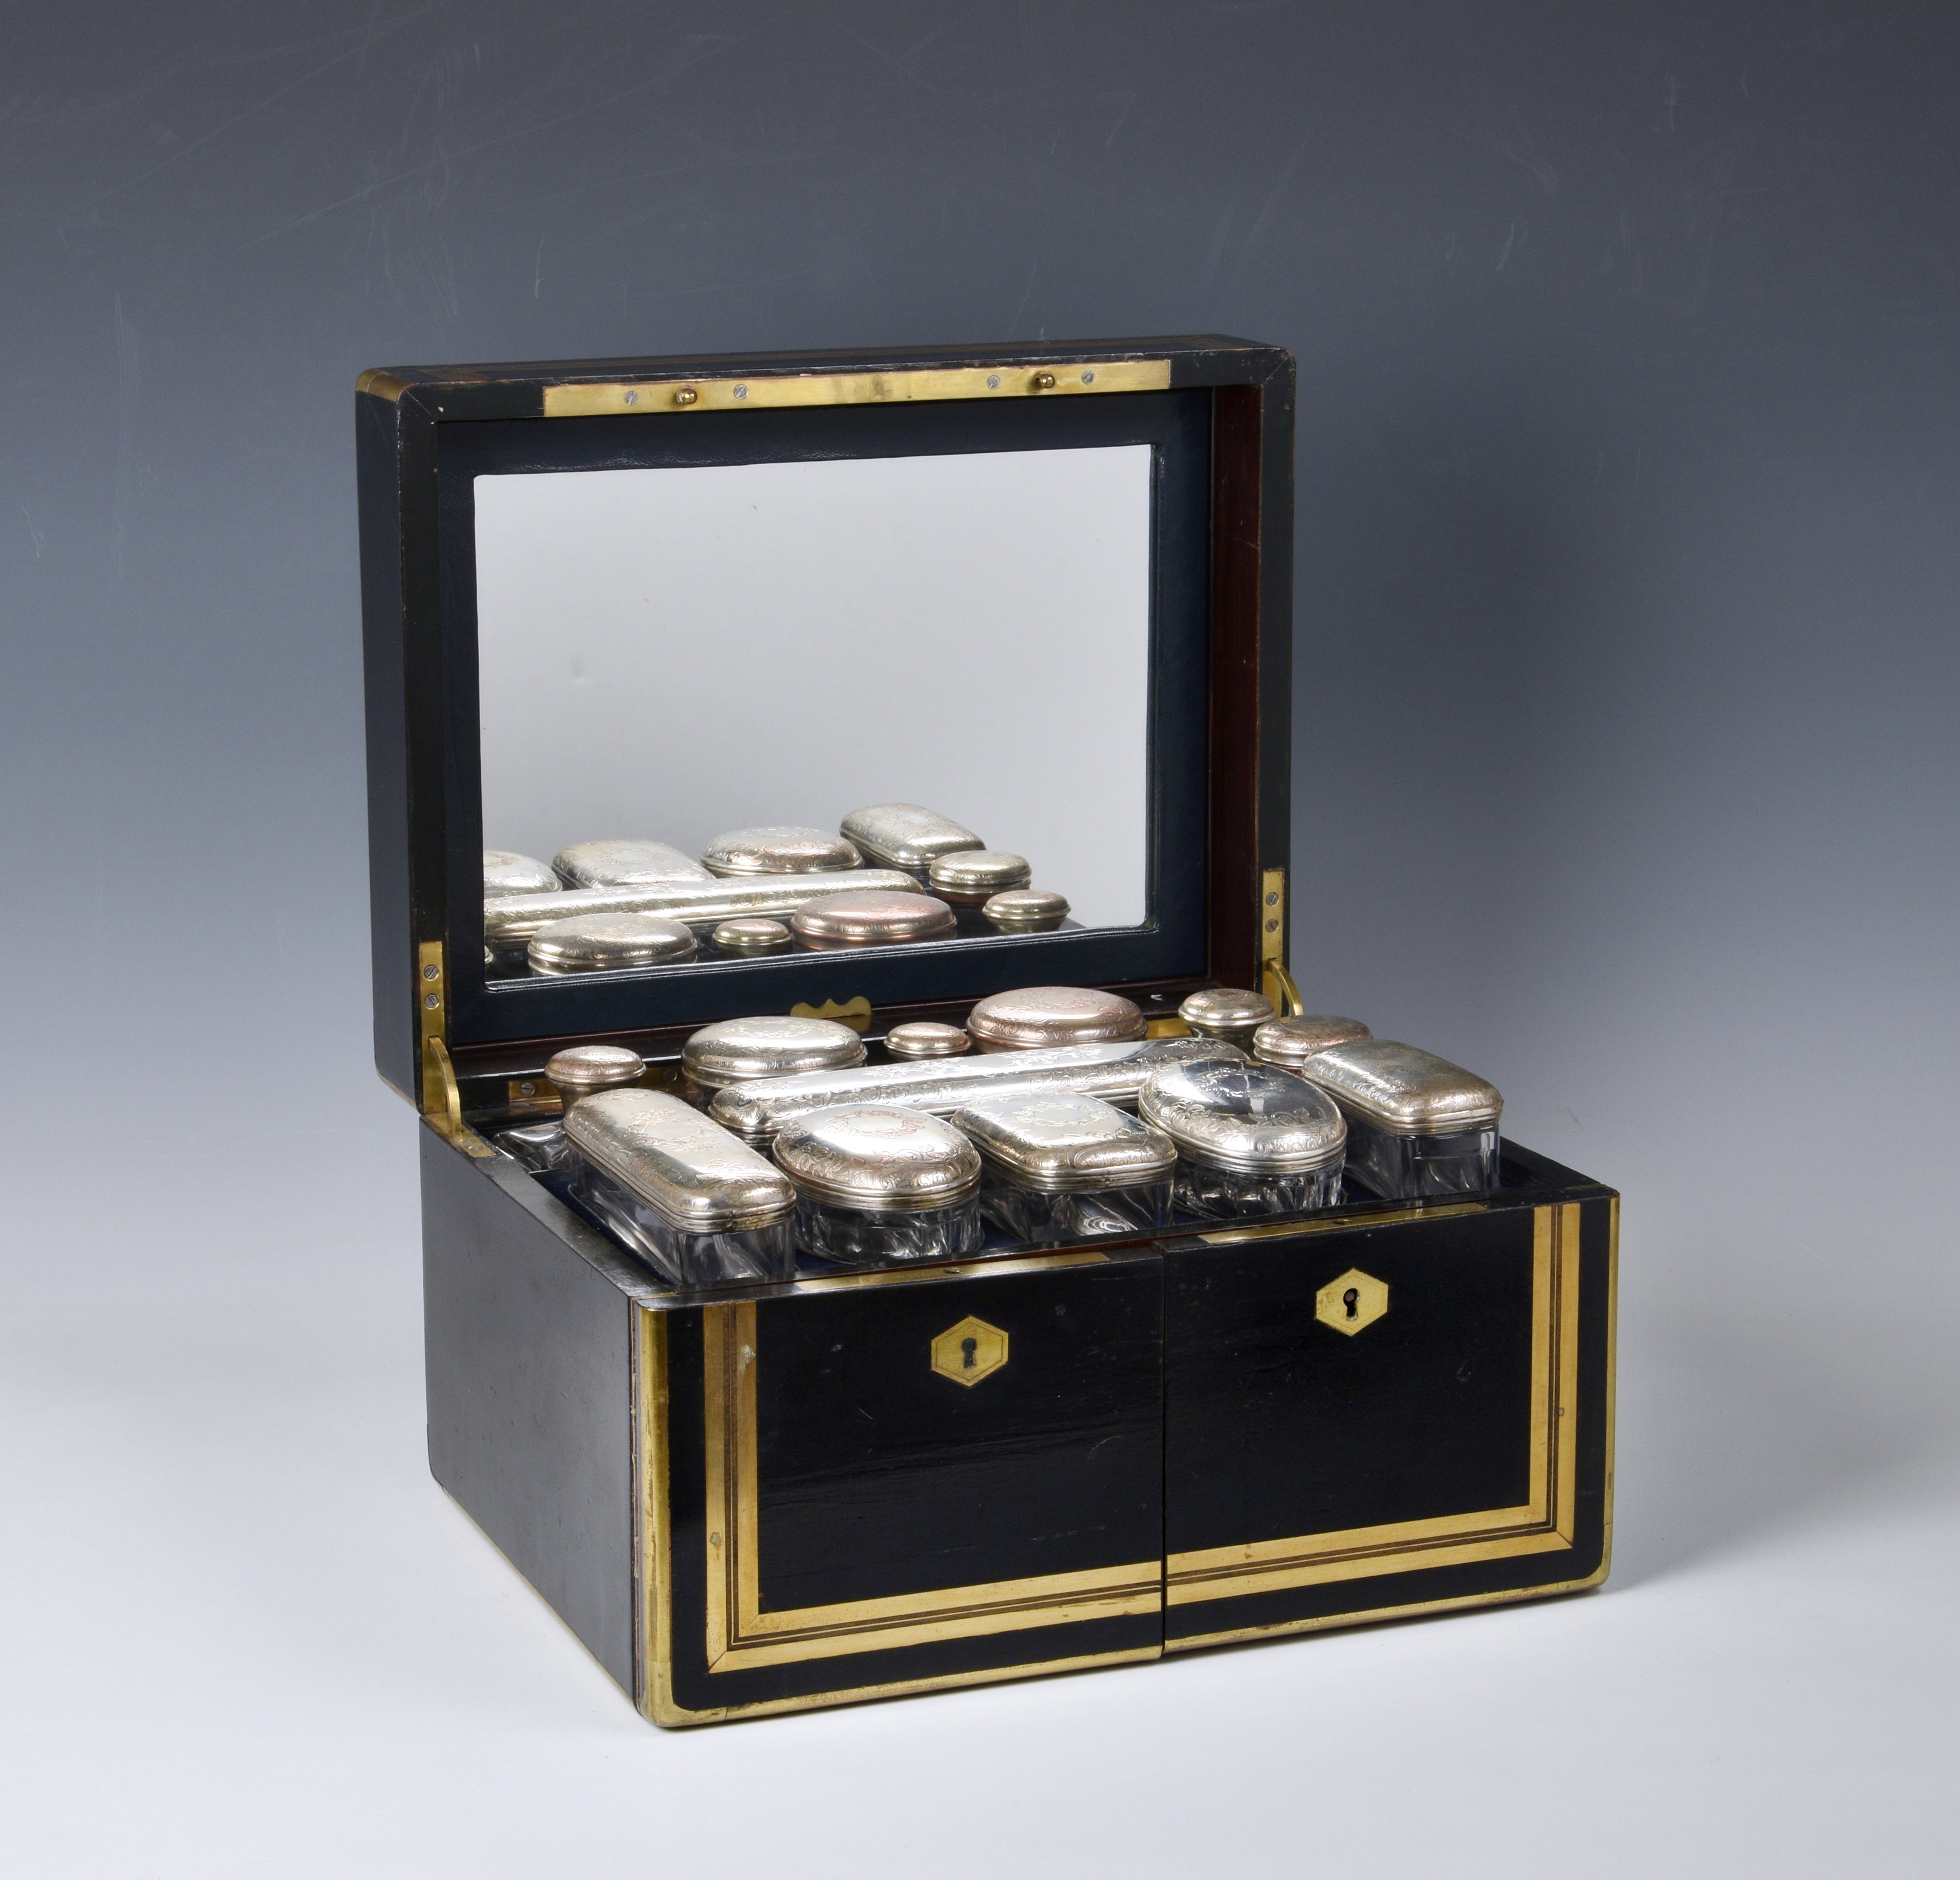 A fine and well fitted 19th century ebonised rosewood Palais Royal travel necessaire / vanity chest, - Image 9 of 9